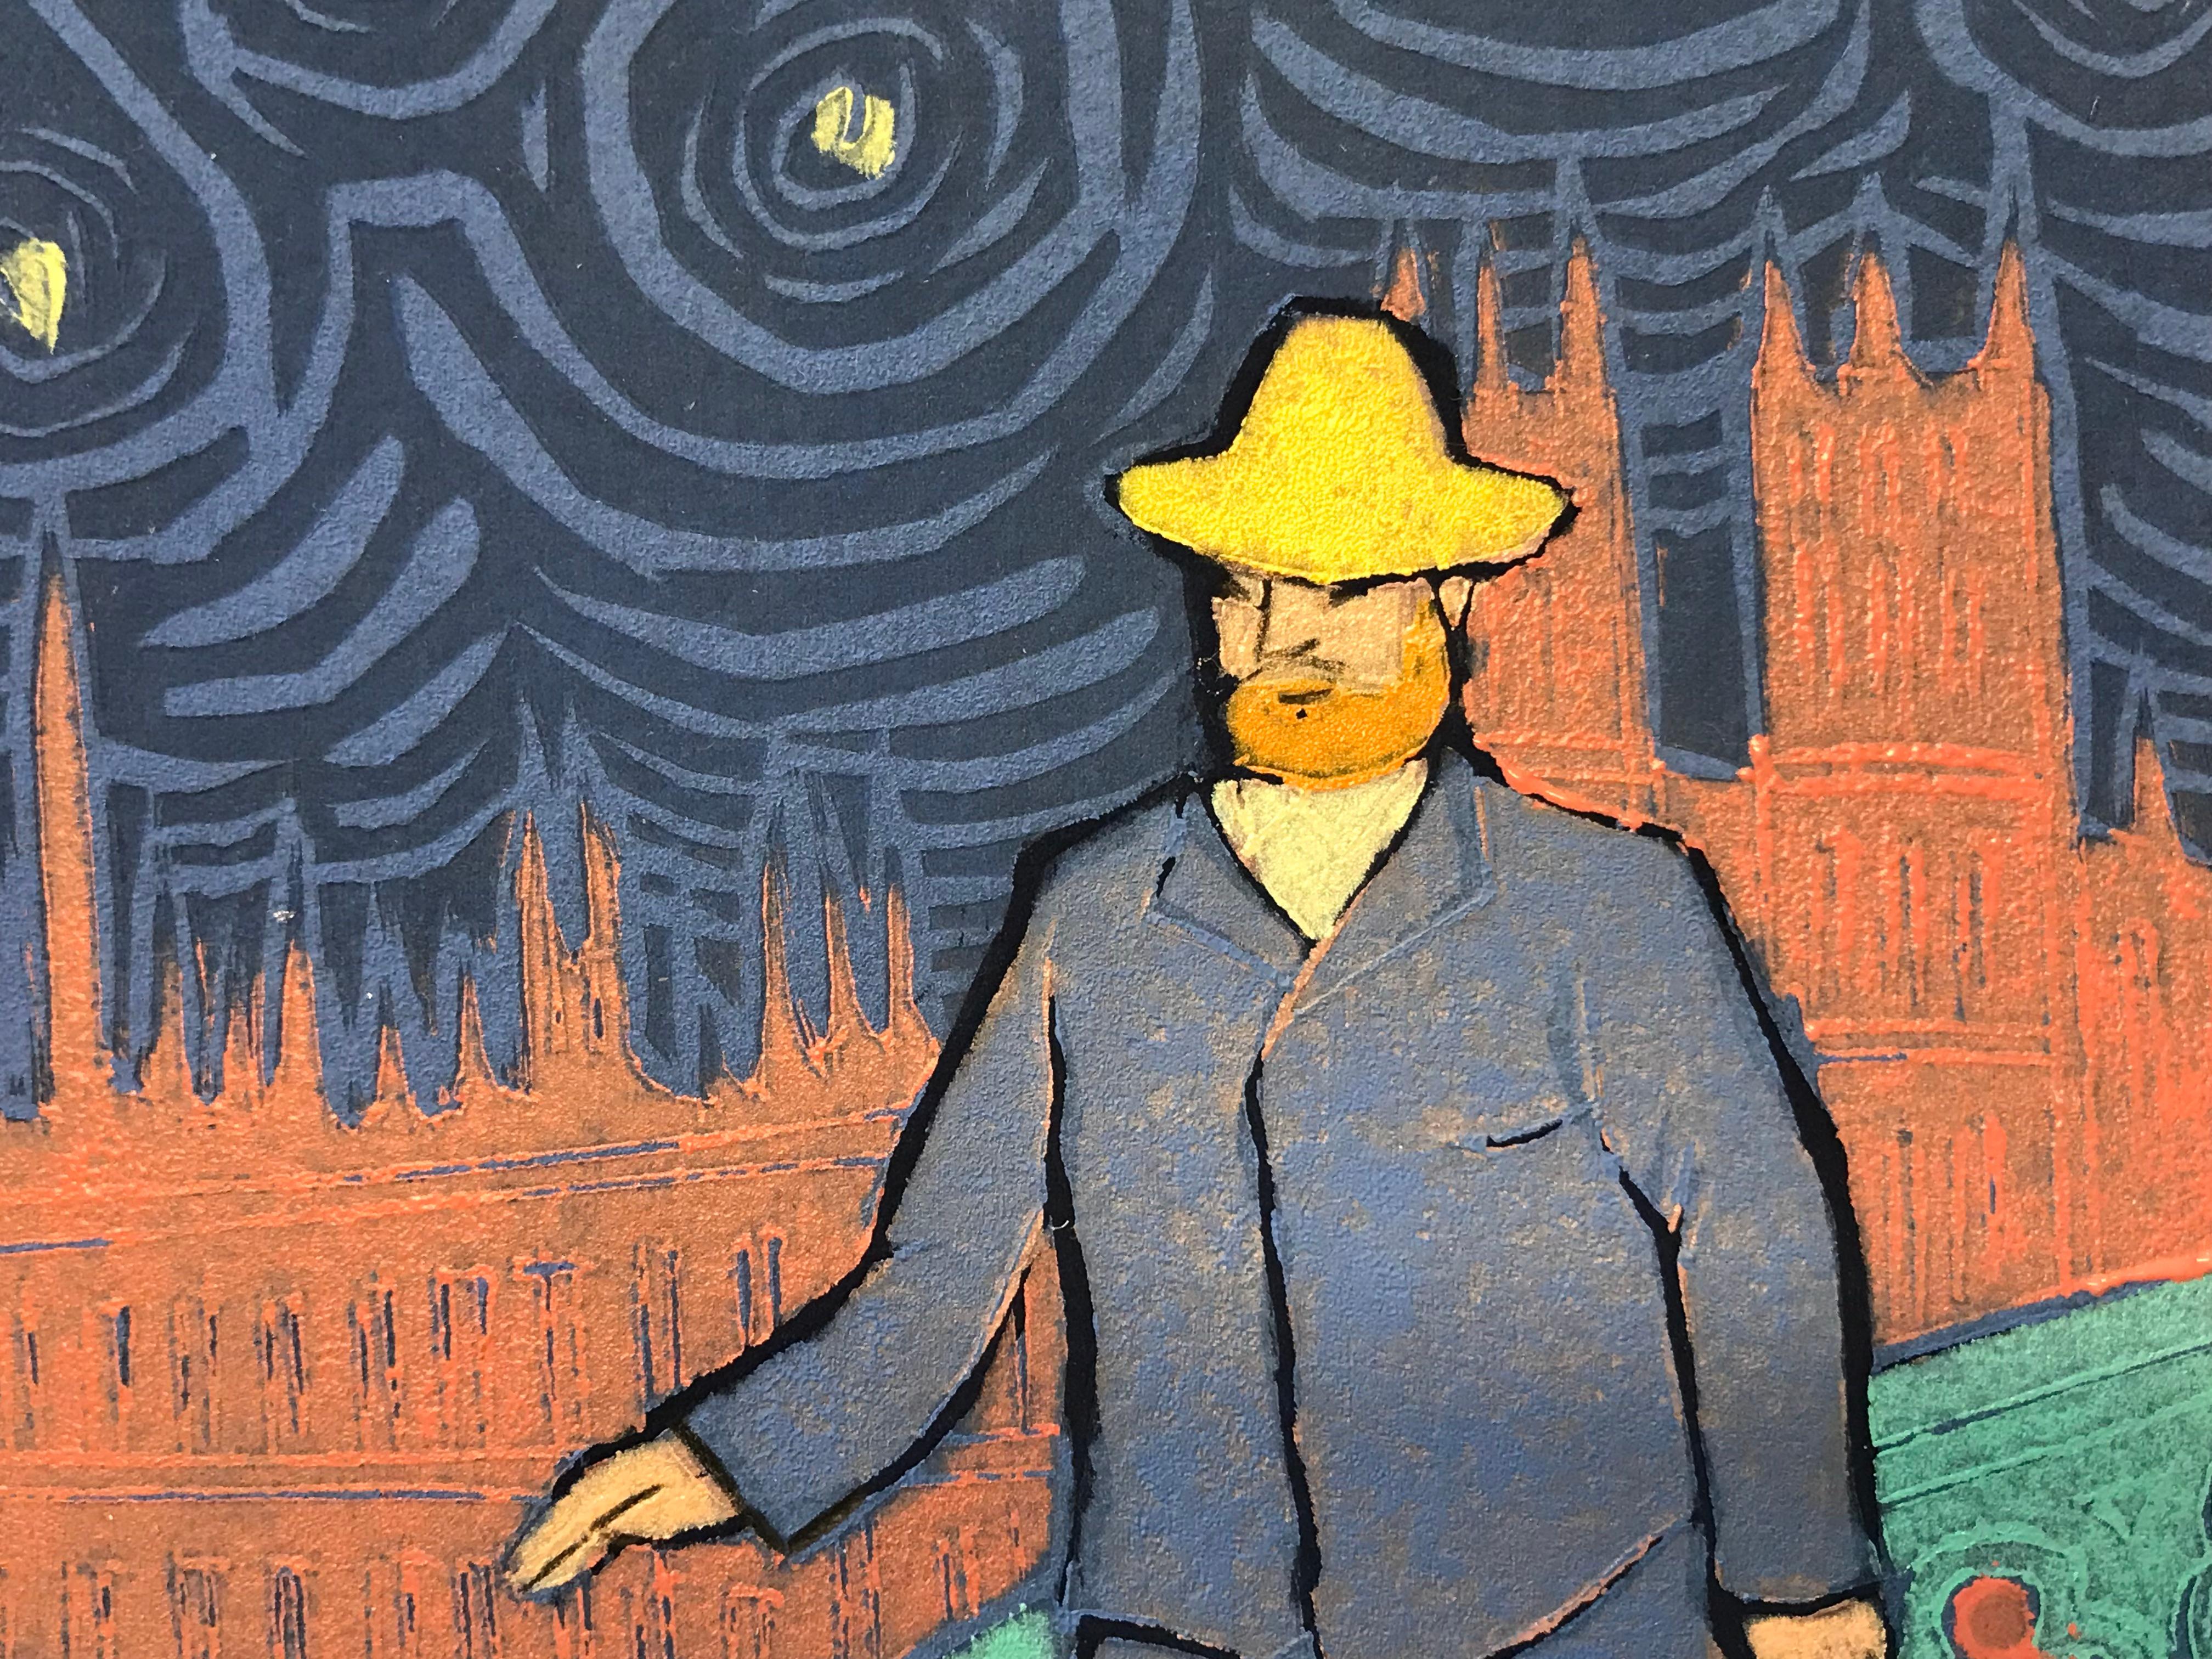 A limited edition woodcut on paper print by Mychael Barratt of Vincent Van Gogh on a night walk though London, as blue, turquoise and browns outline Big Ben and the Parliament in the distance. 

Additional information:

Mychael Barratt 
Once upon a